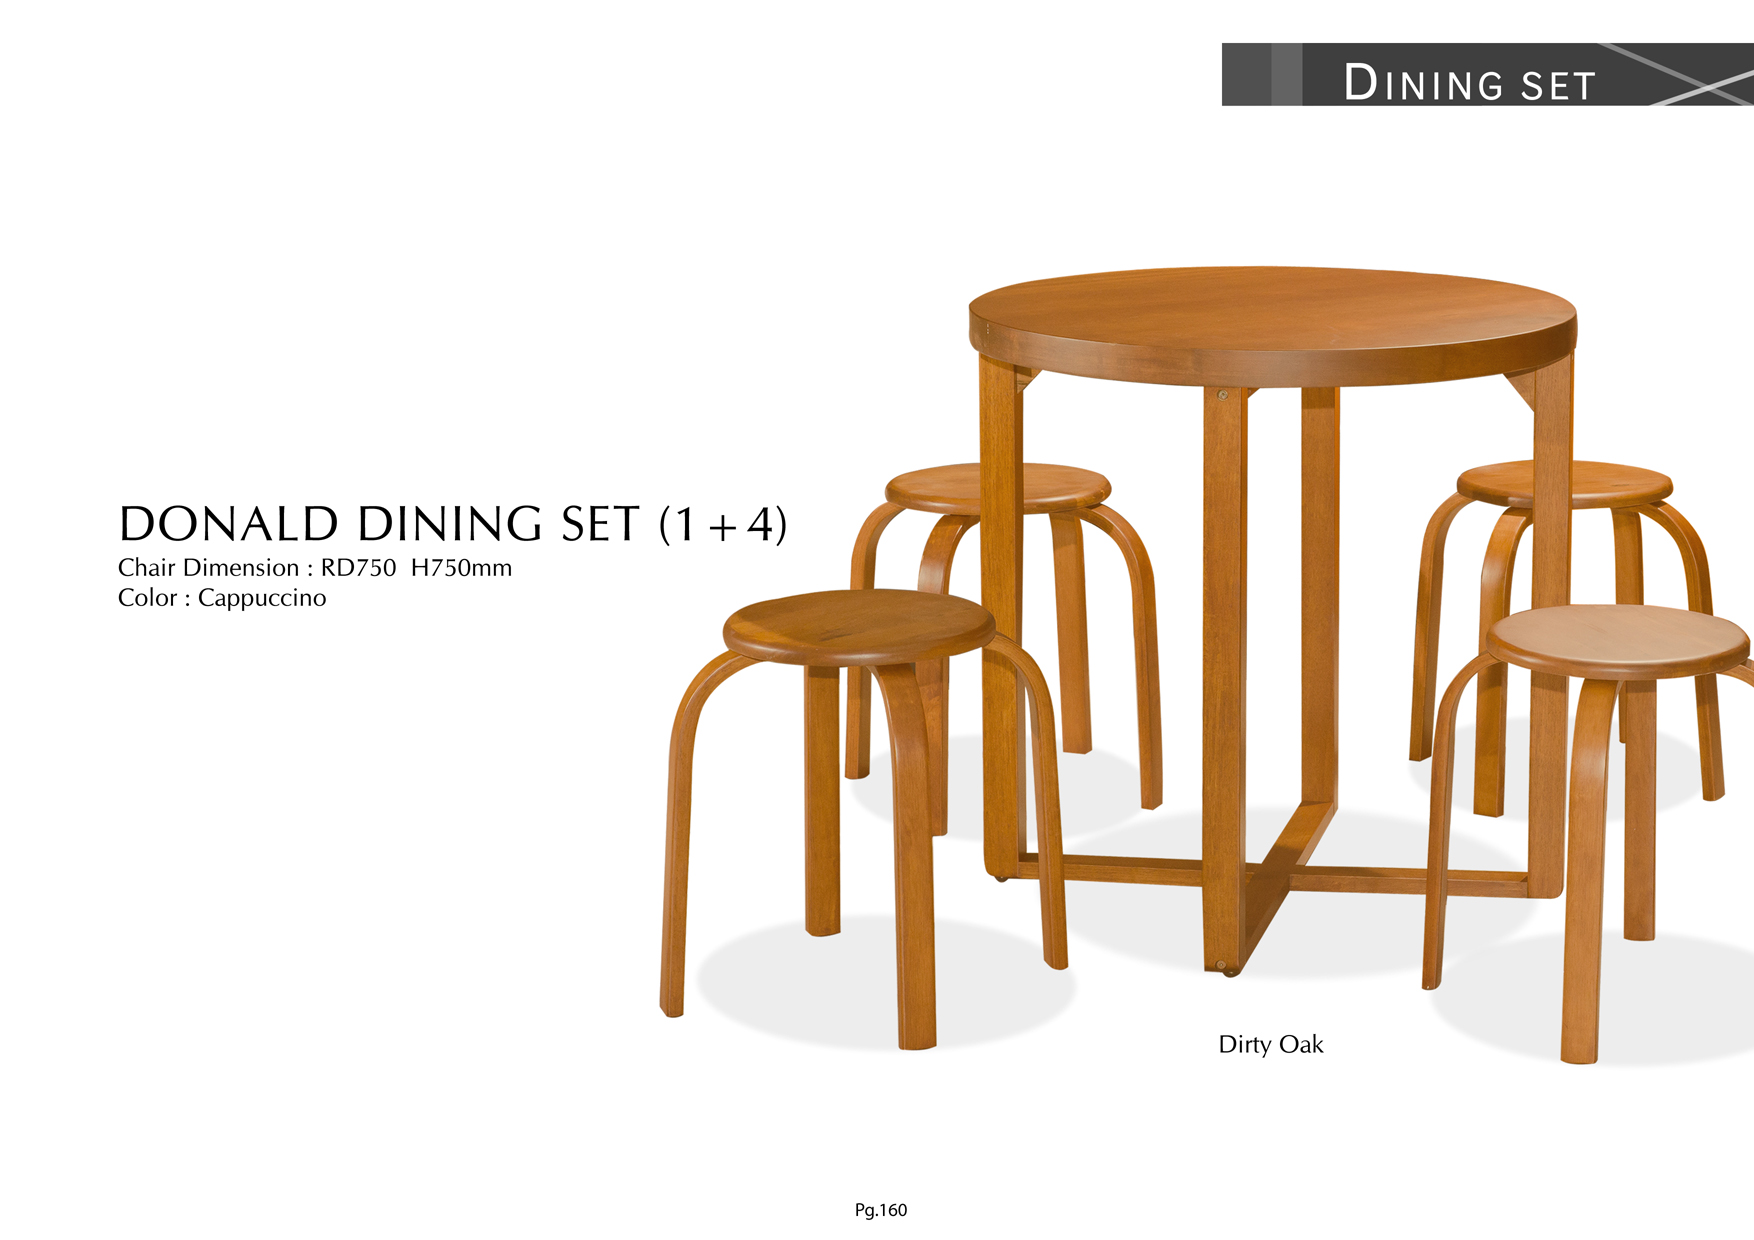 Product: PG160. DONALD DINING SET